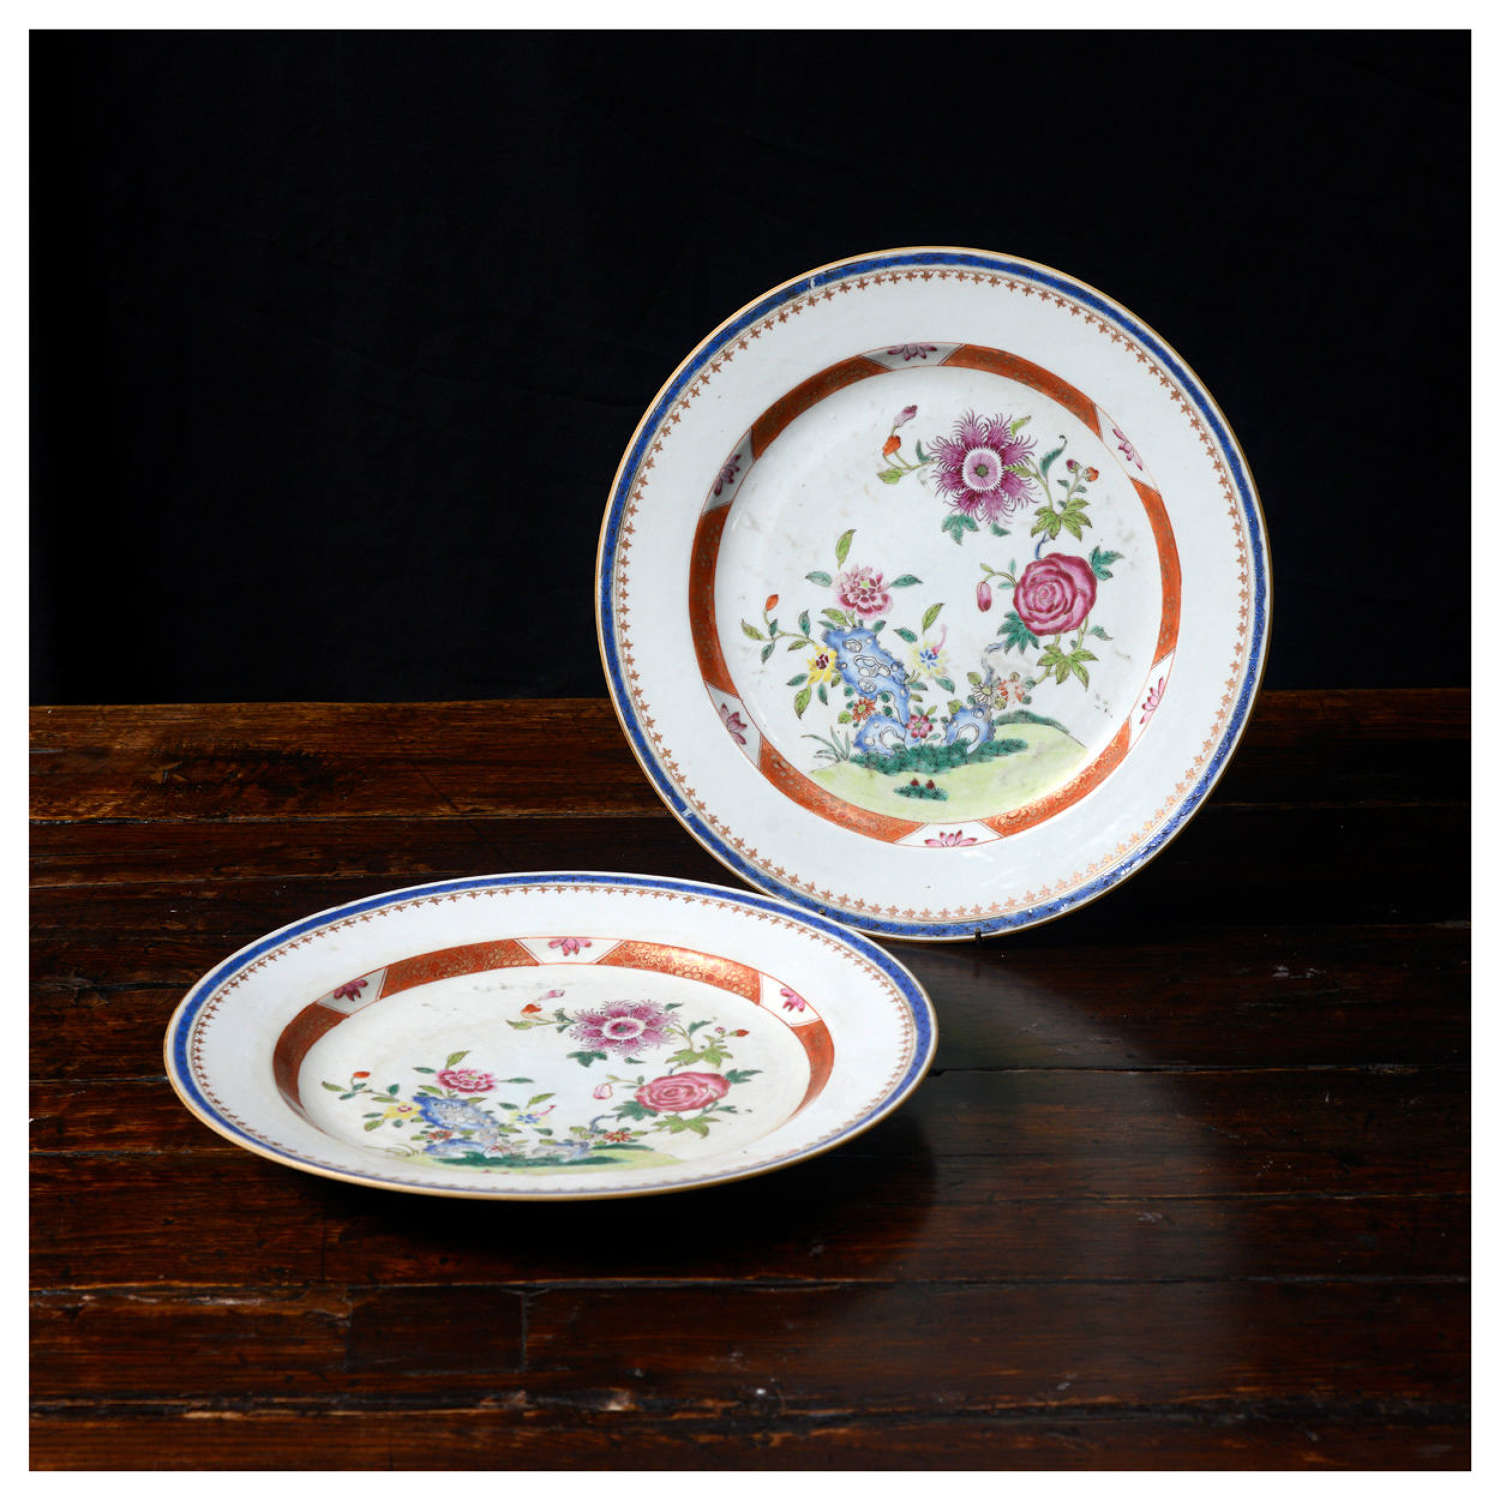 Pair of 18th Century Famille Rose Chinese export chargers